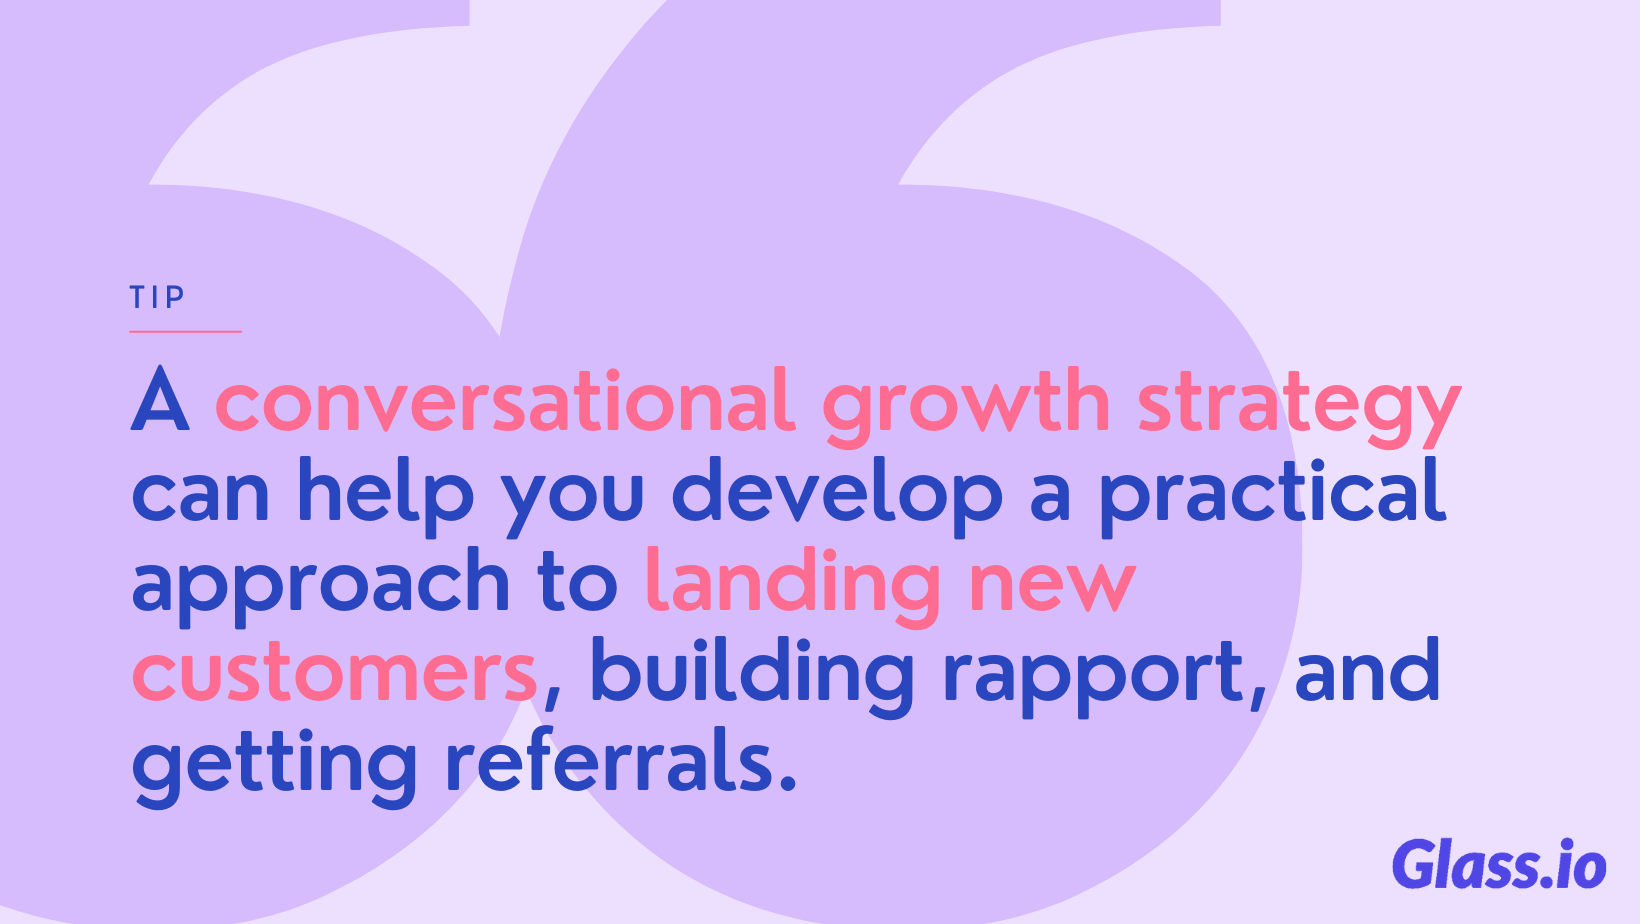 A conversational growth strategy can help you develop a practical approach to landing new customers, building rapport, and getting referrals. 